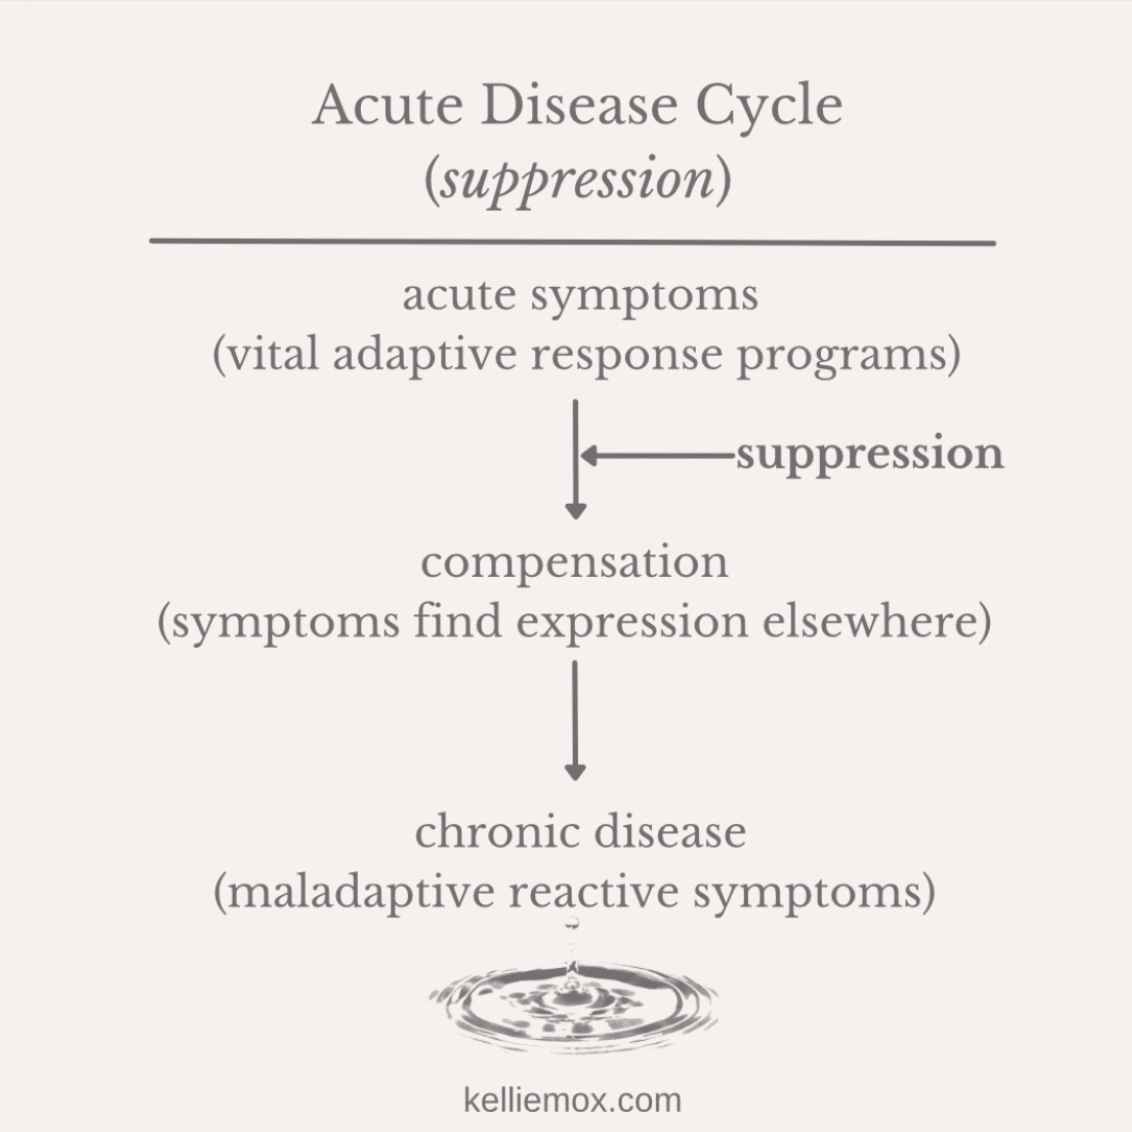 A text about Acute Disease Cycle on suppression